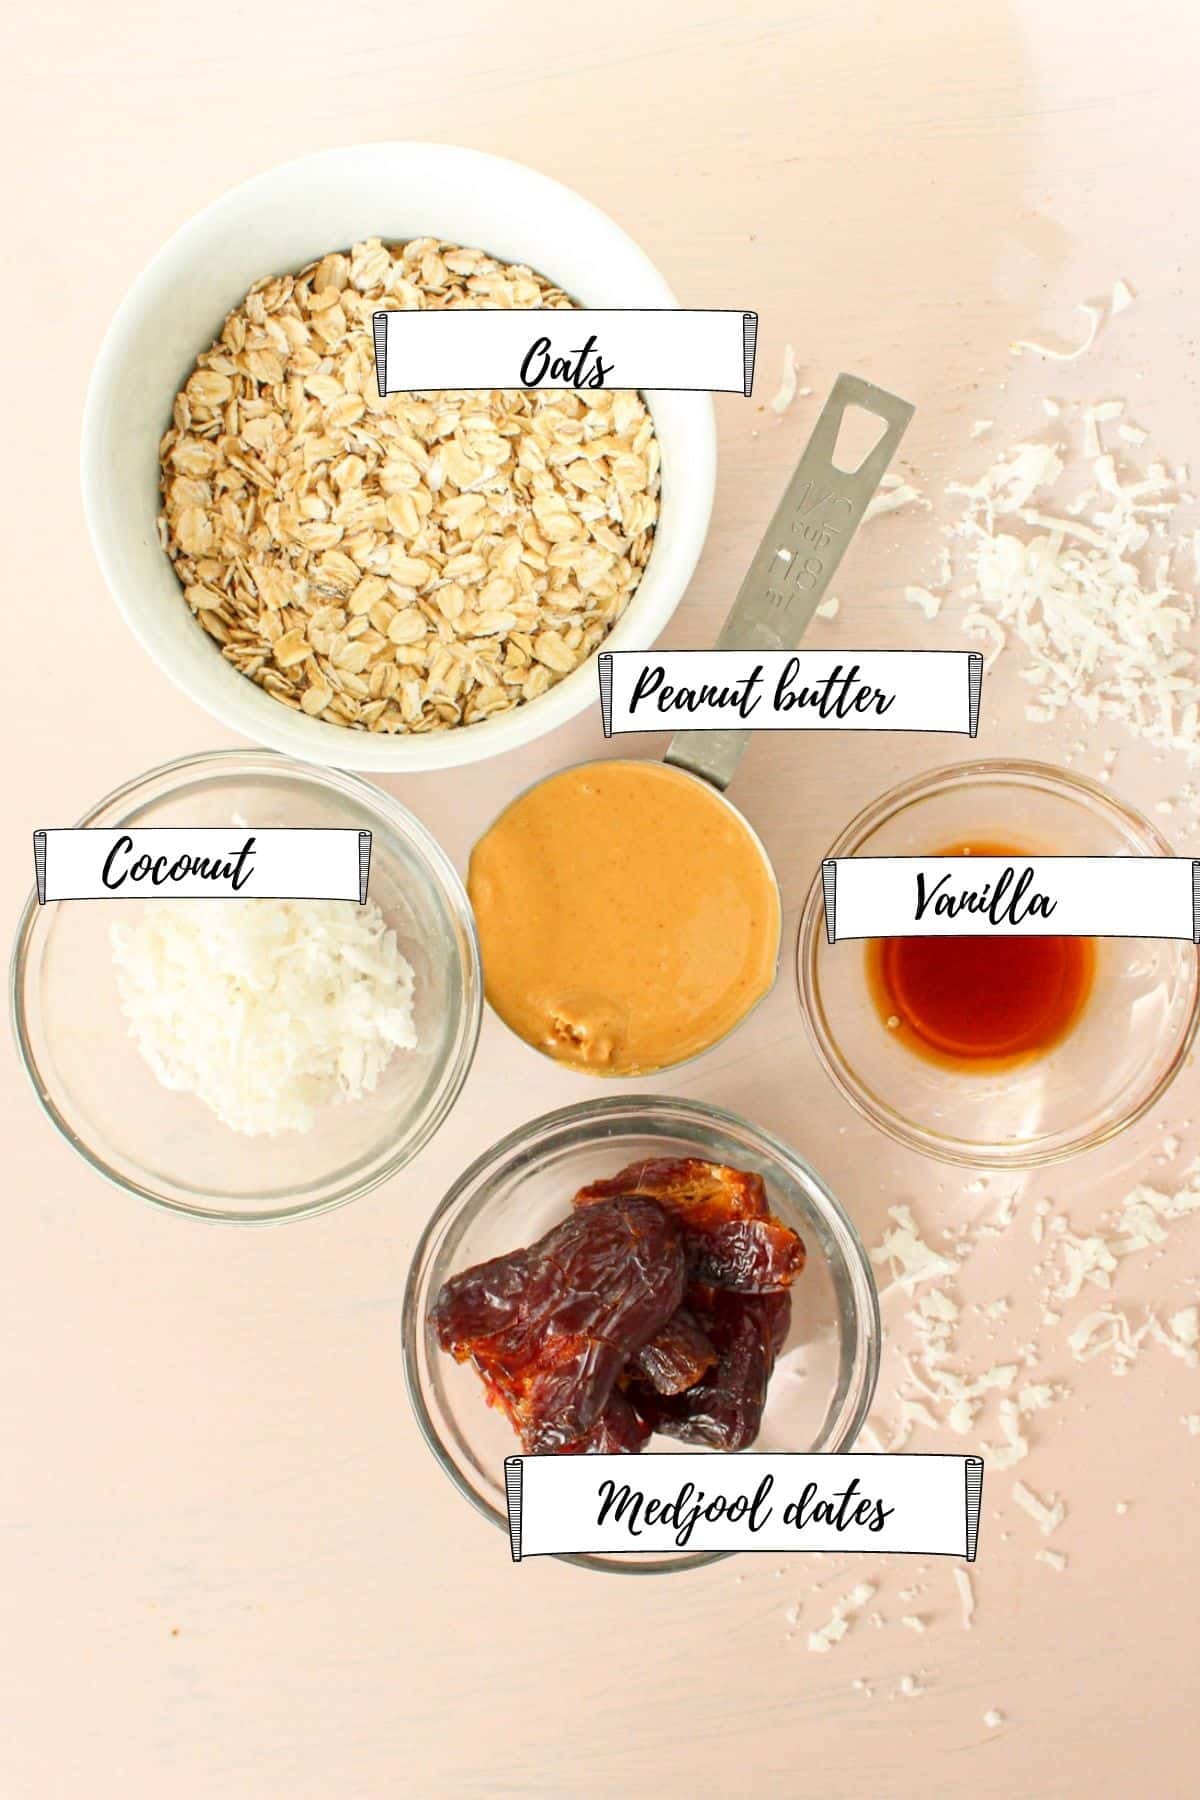 Peanut butter bliss balls ingredients laid out